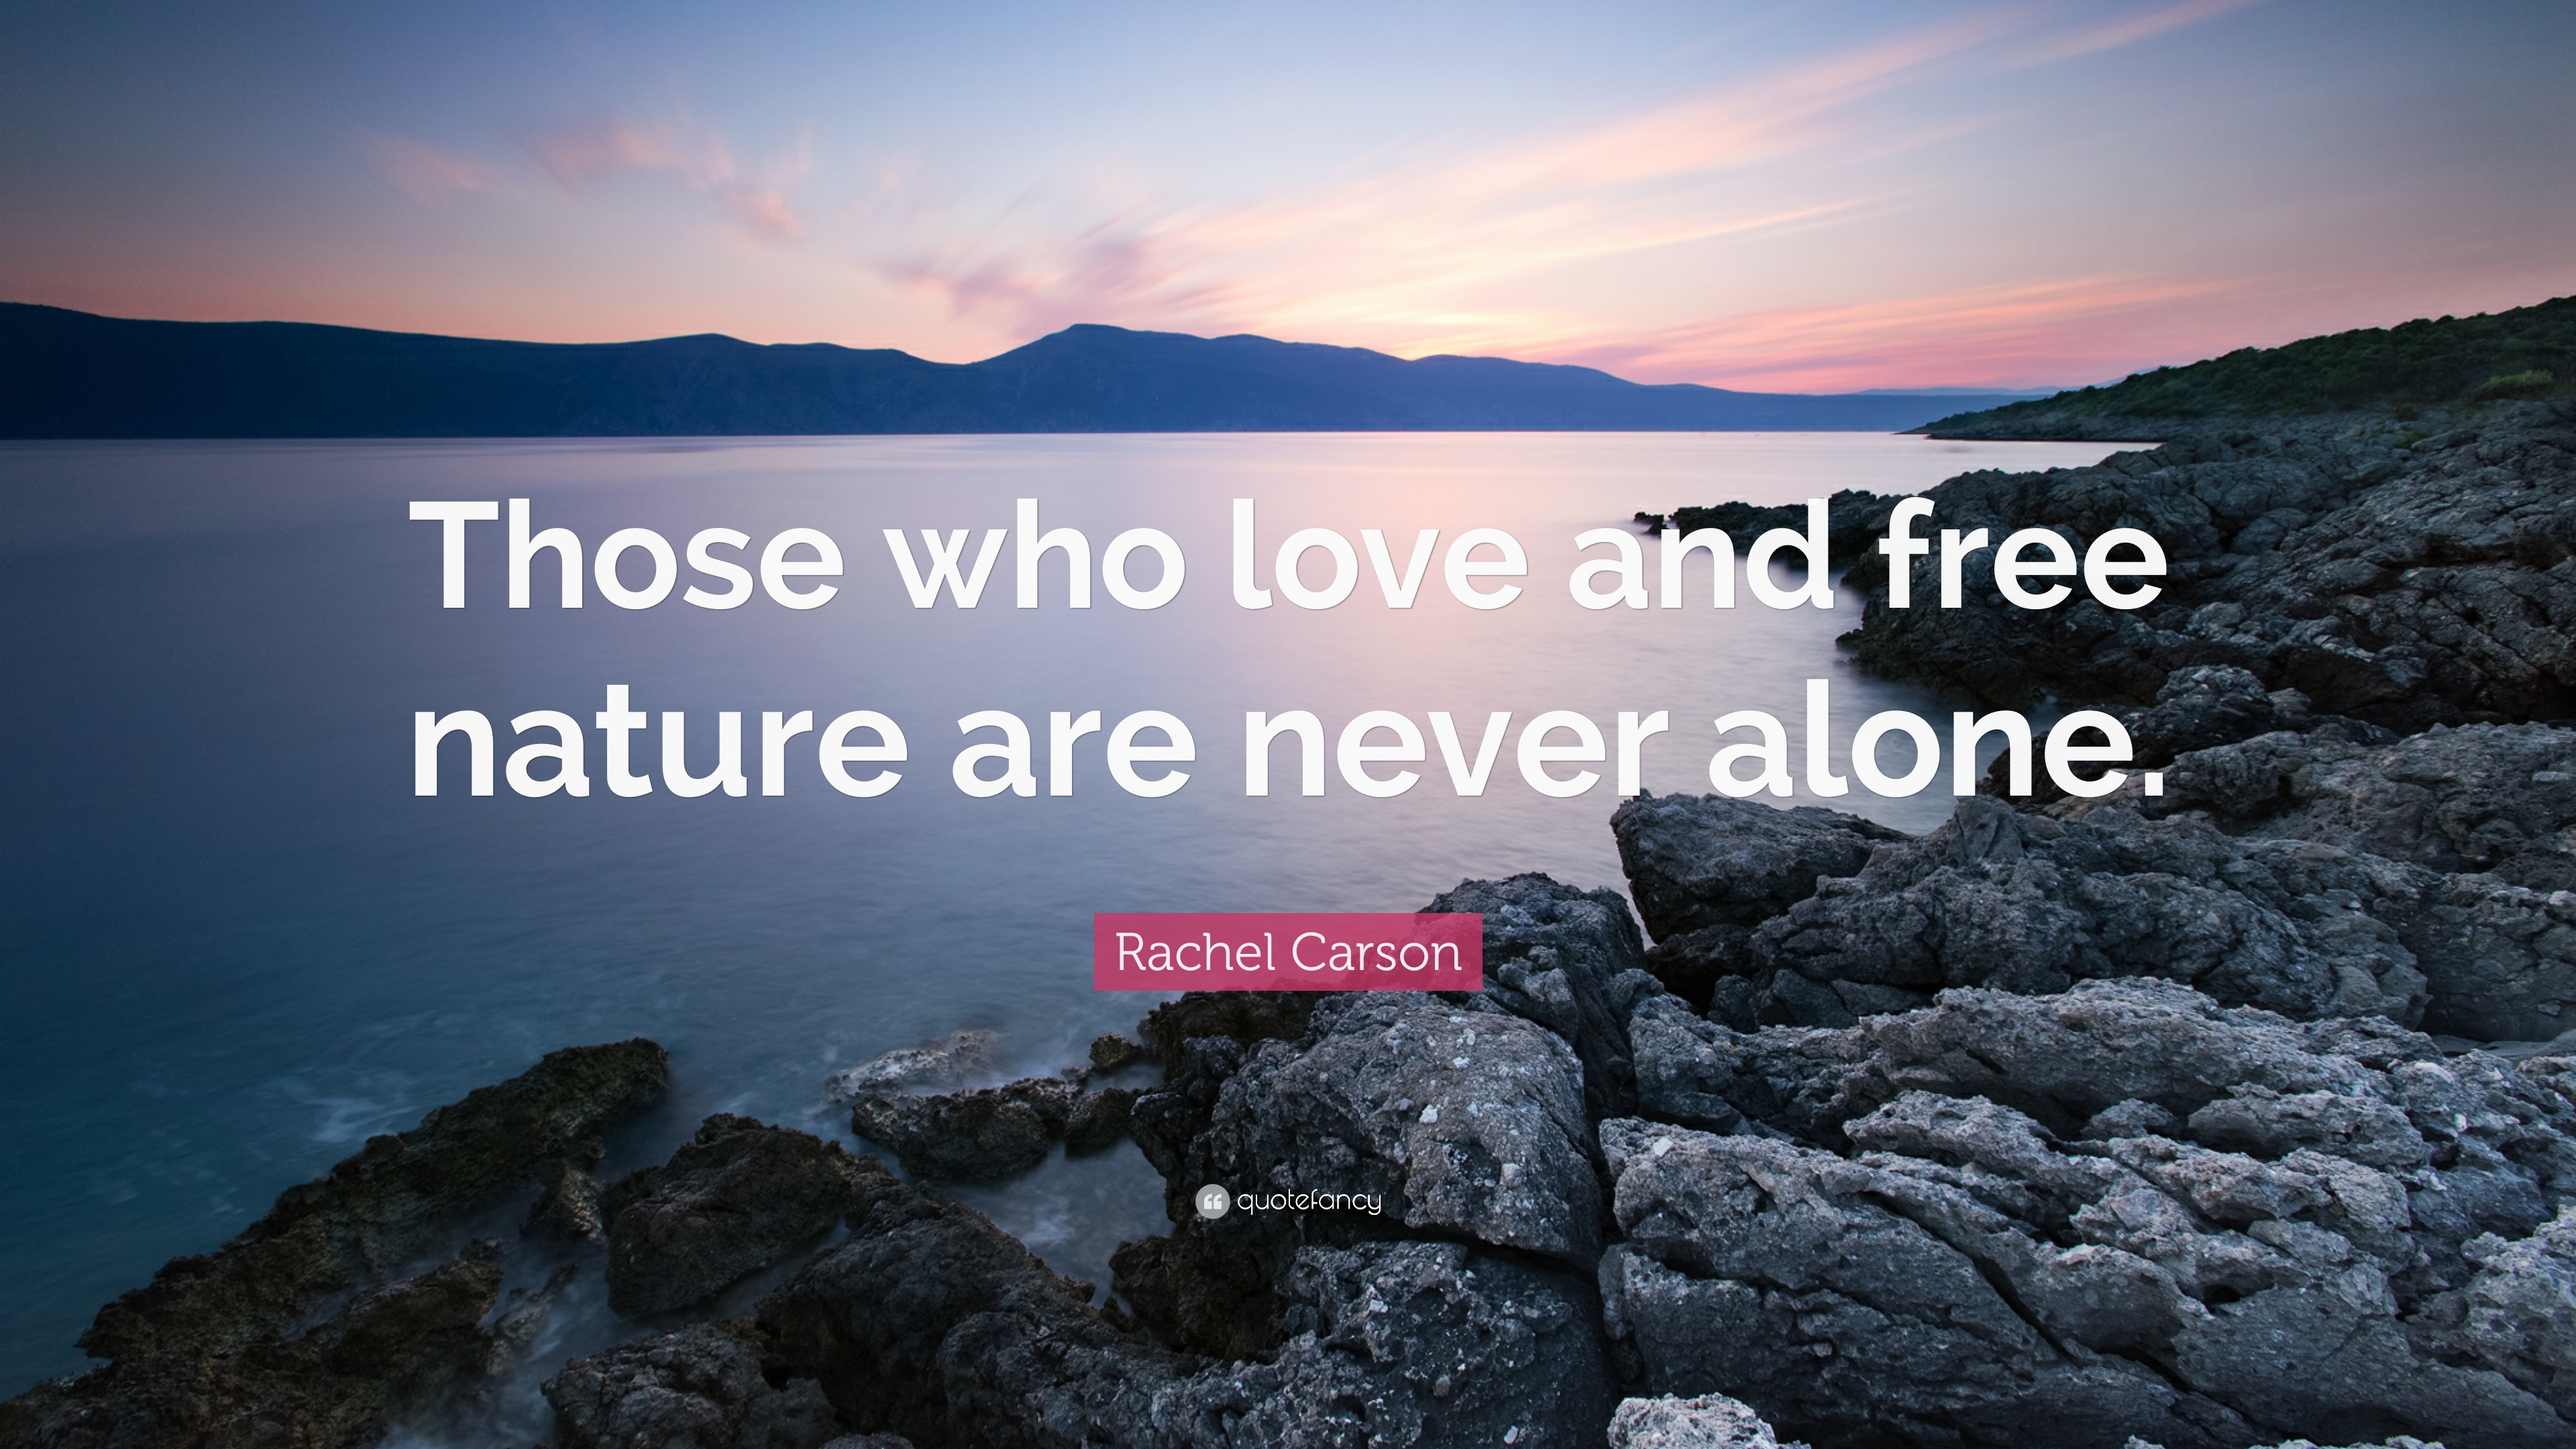 Rachel Carson Quote Those Who Love And Free Nature Are Never Alone